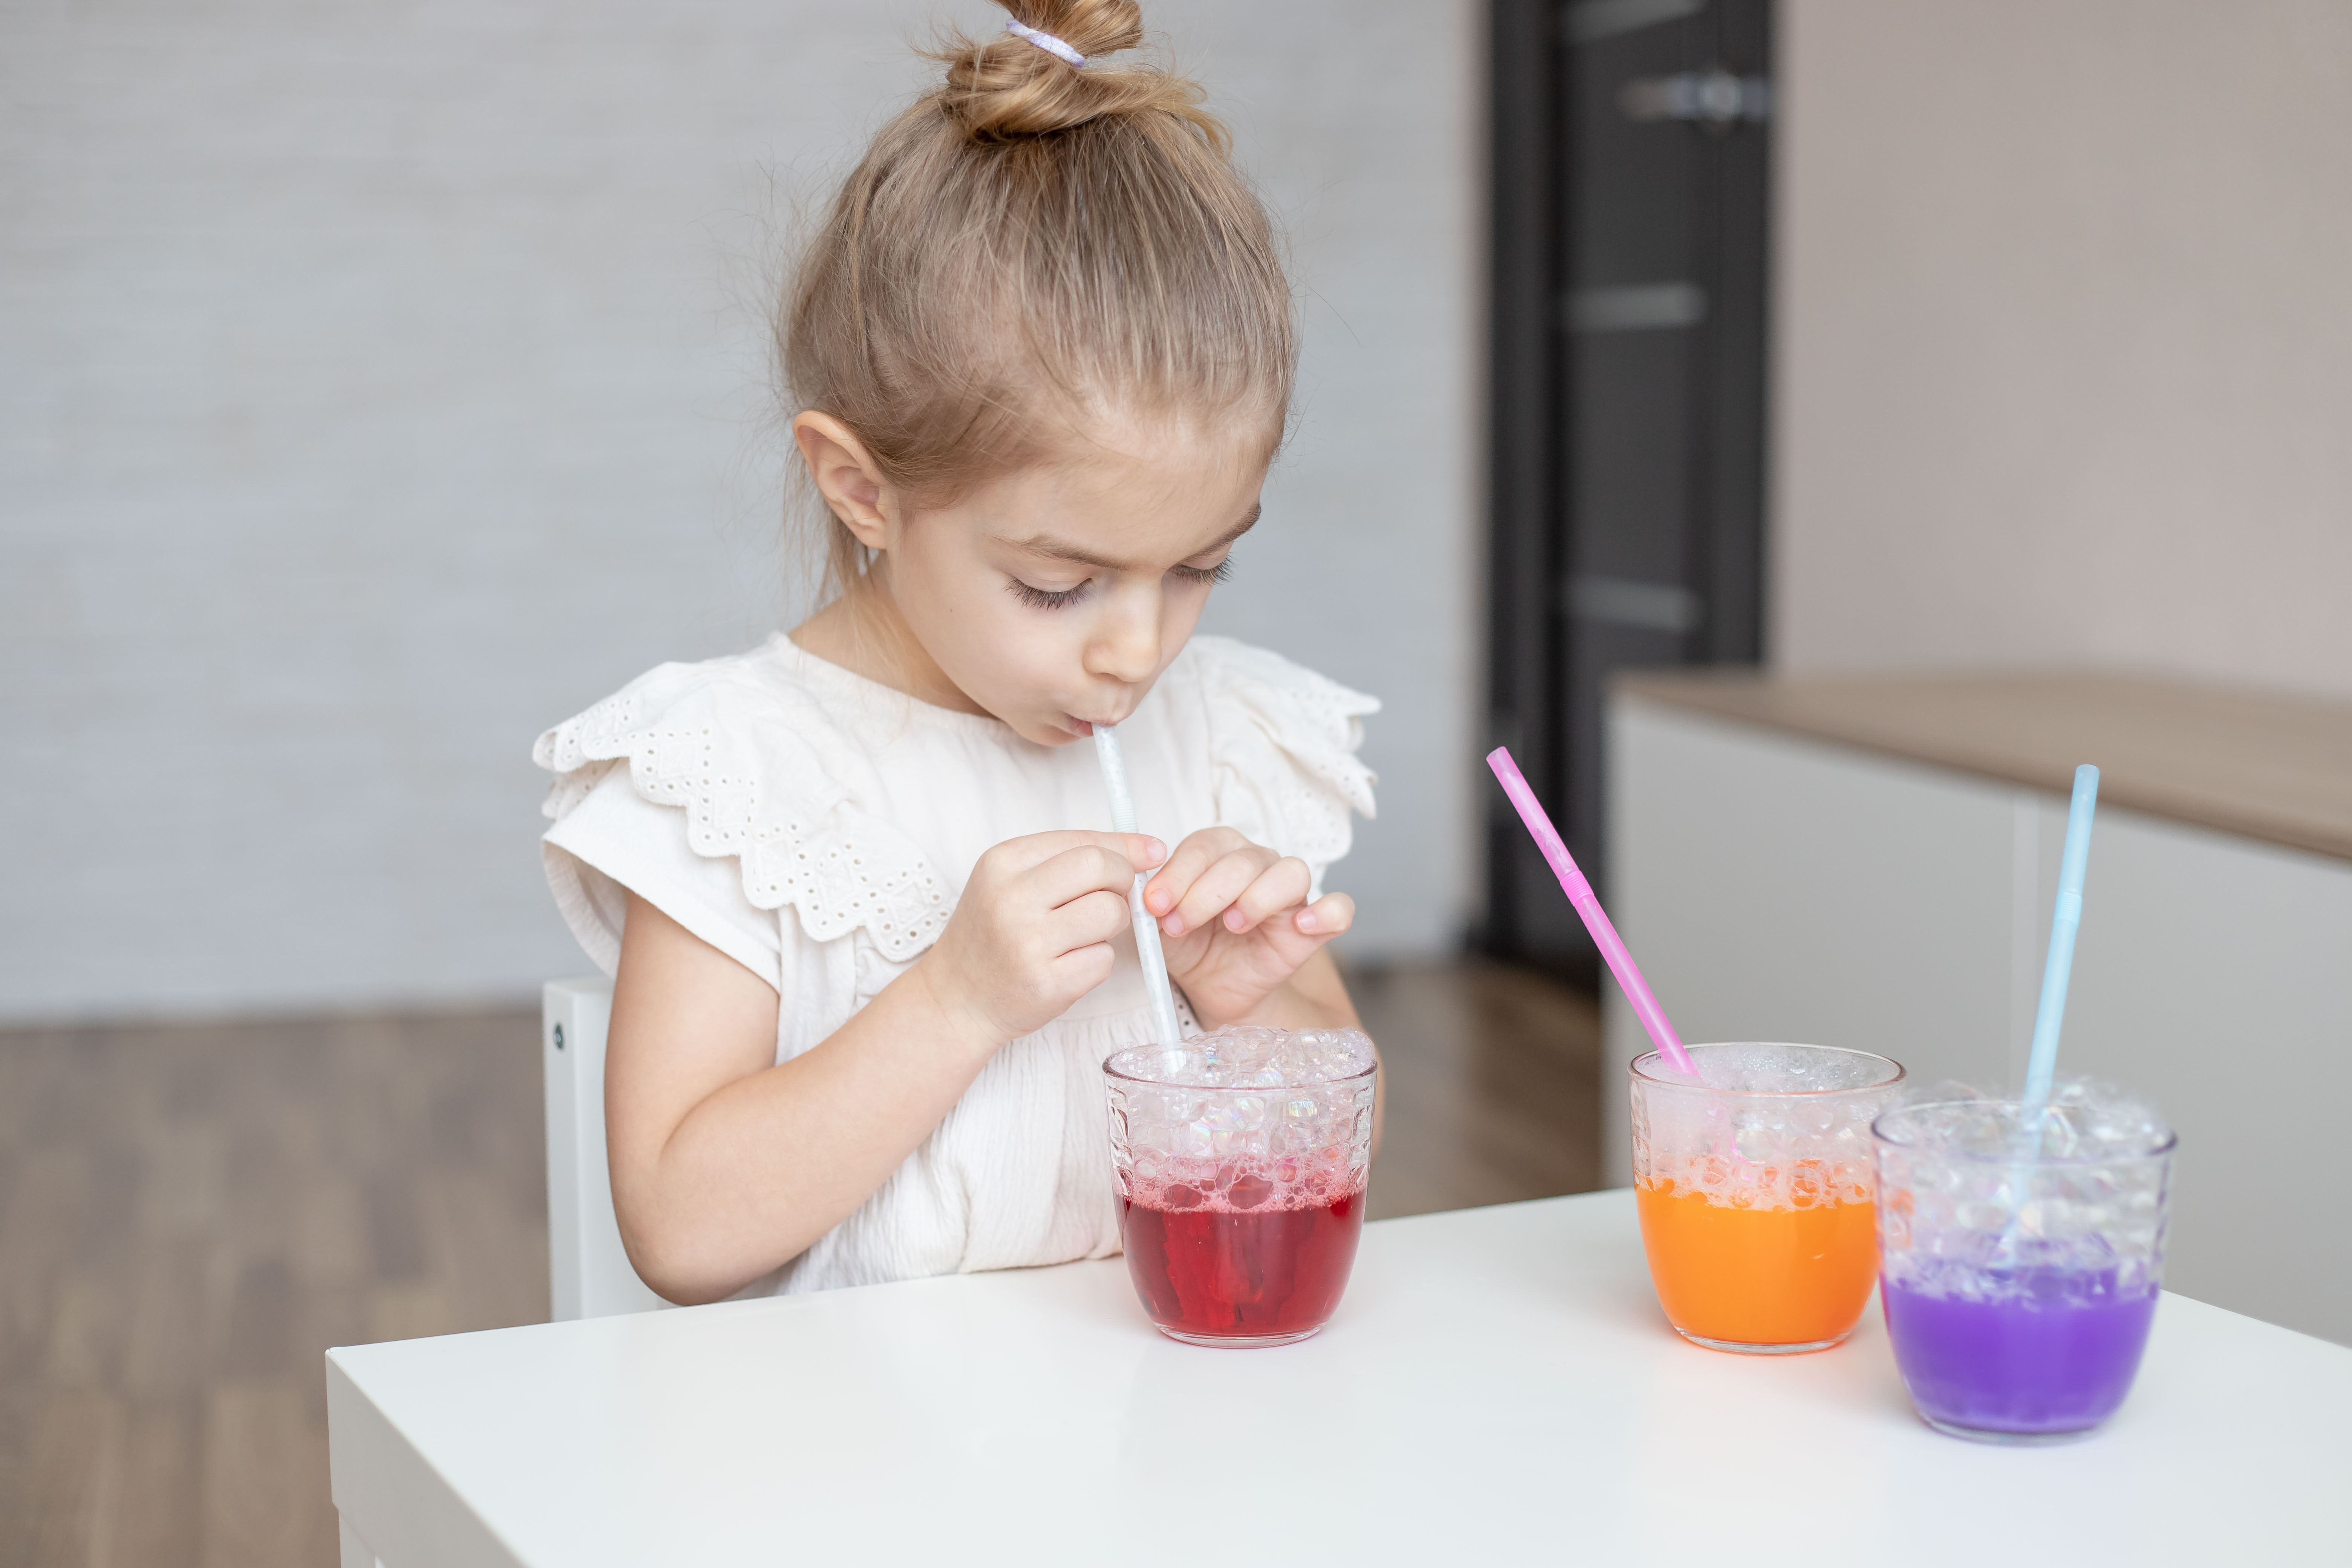 a girl sits at a desk with different colored cups in front of her and she blows into the cups with straws for a bubble activity